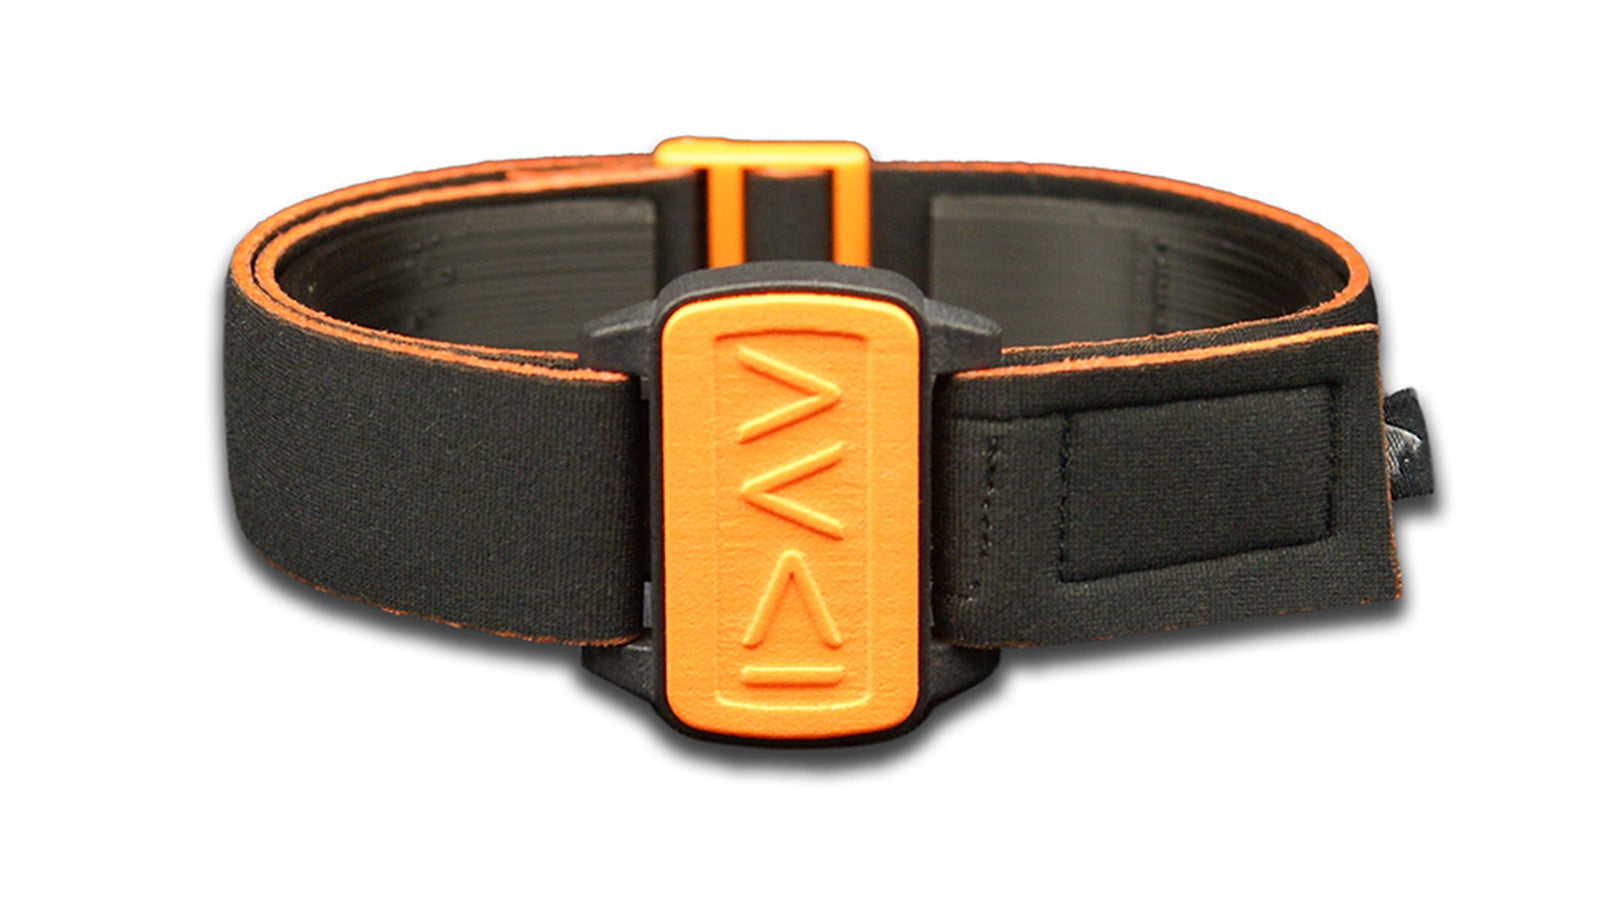 Dexband armband cover in orange with motif I am Greater in symbols. Black strap edged in coordinating Orange.